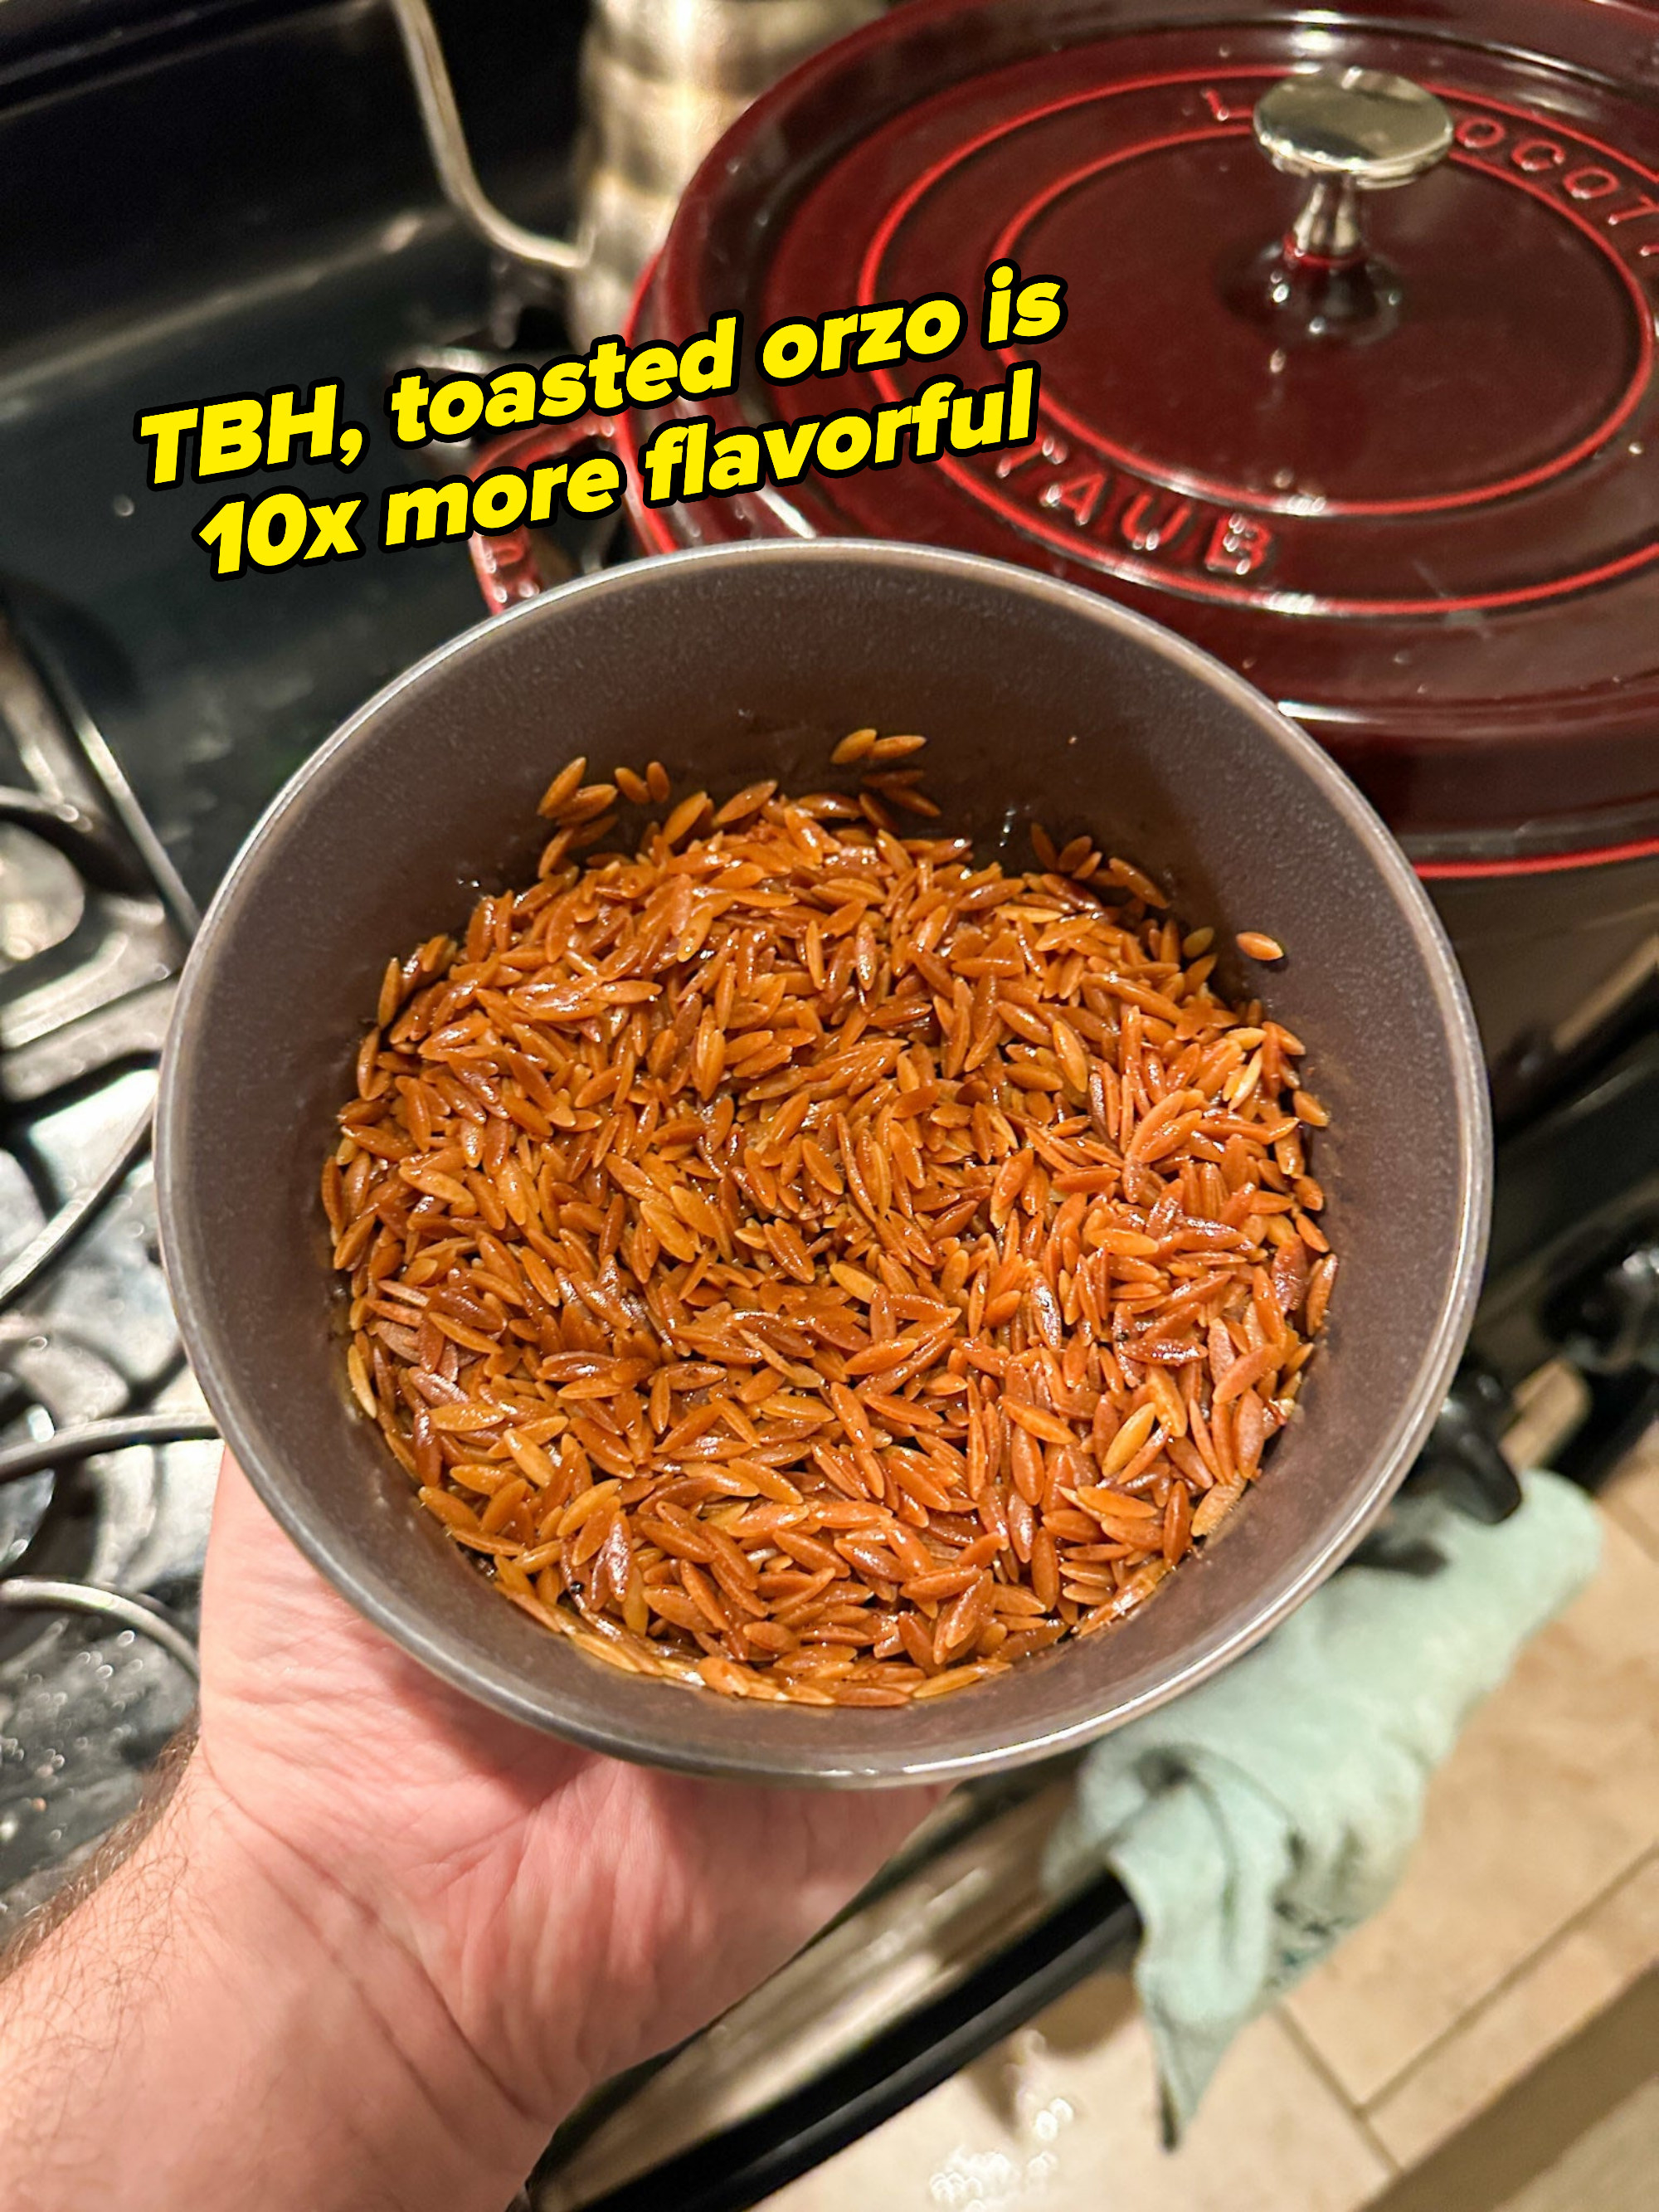 to be honest, toasted orzo is 10x more flavorful